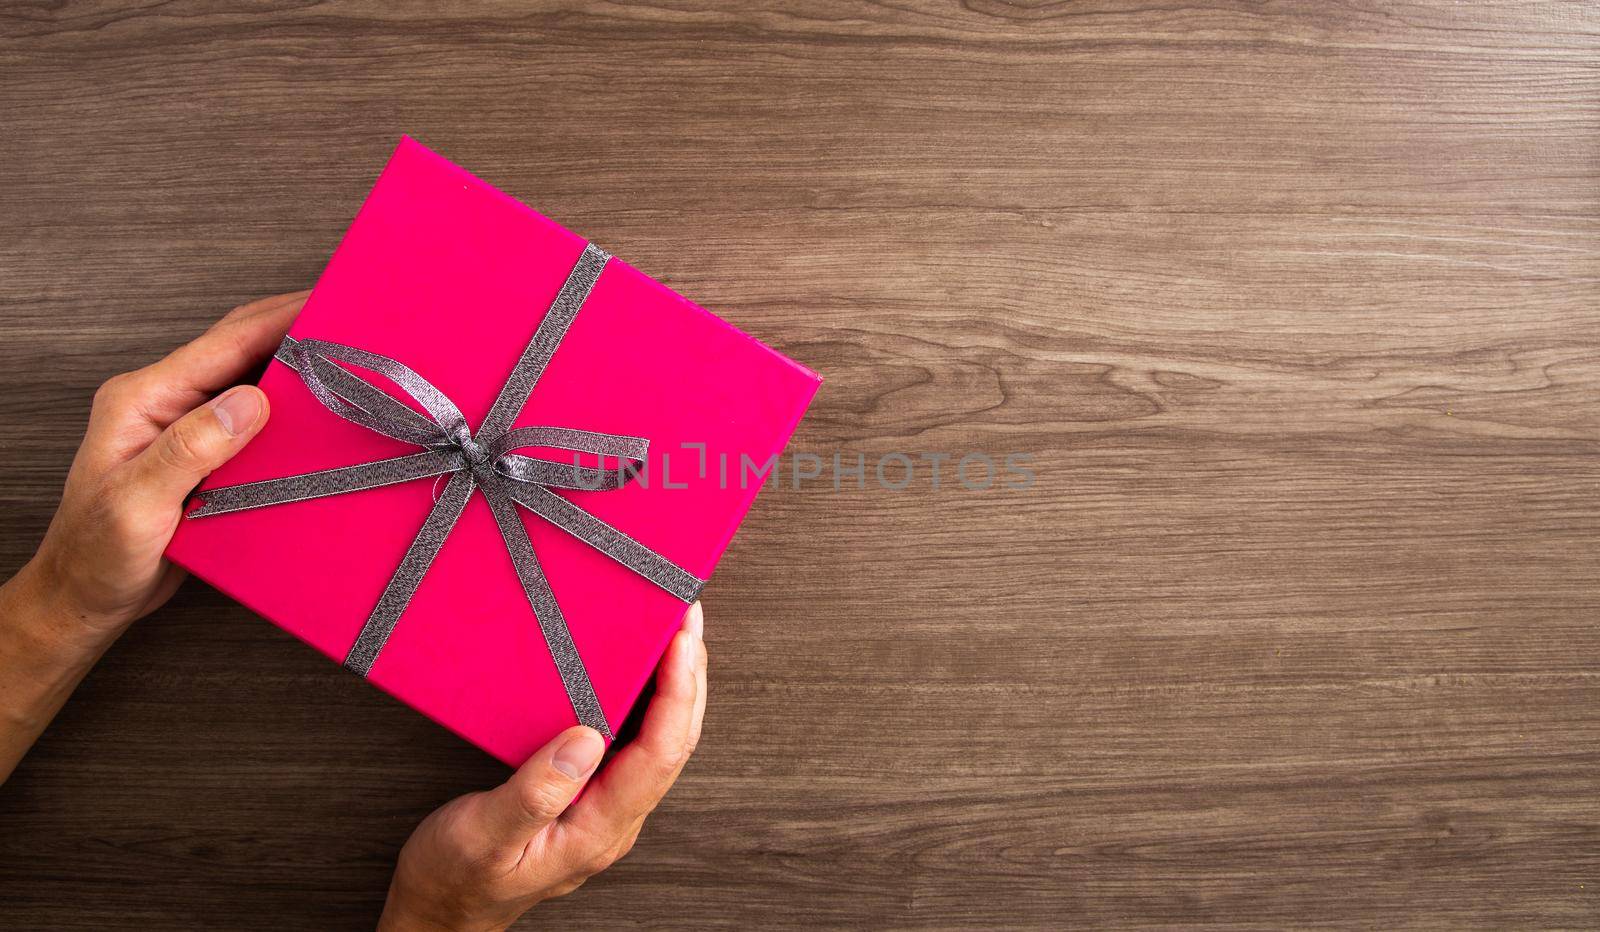 Christmas composition. Christmas gifts, decorations on wooden background. Flat lay, top view. Copy space